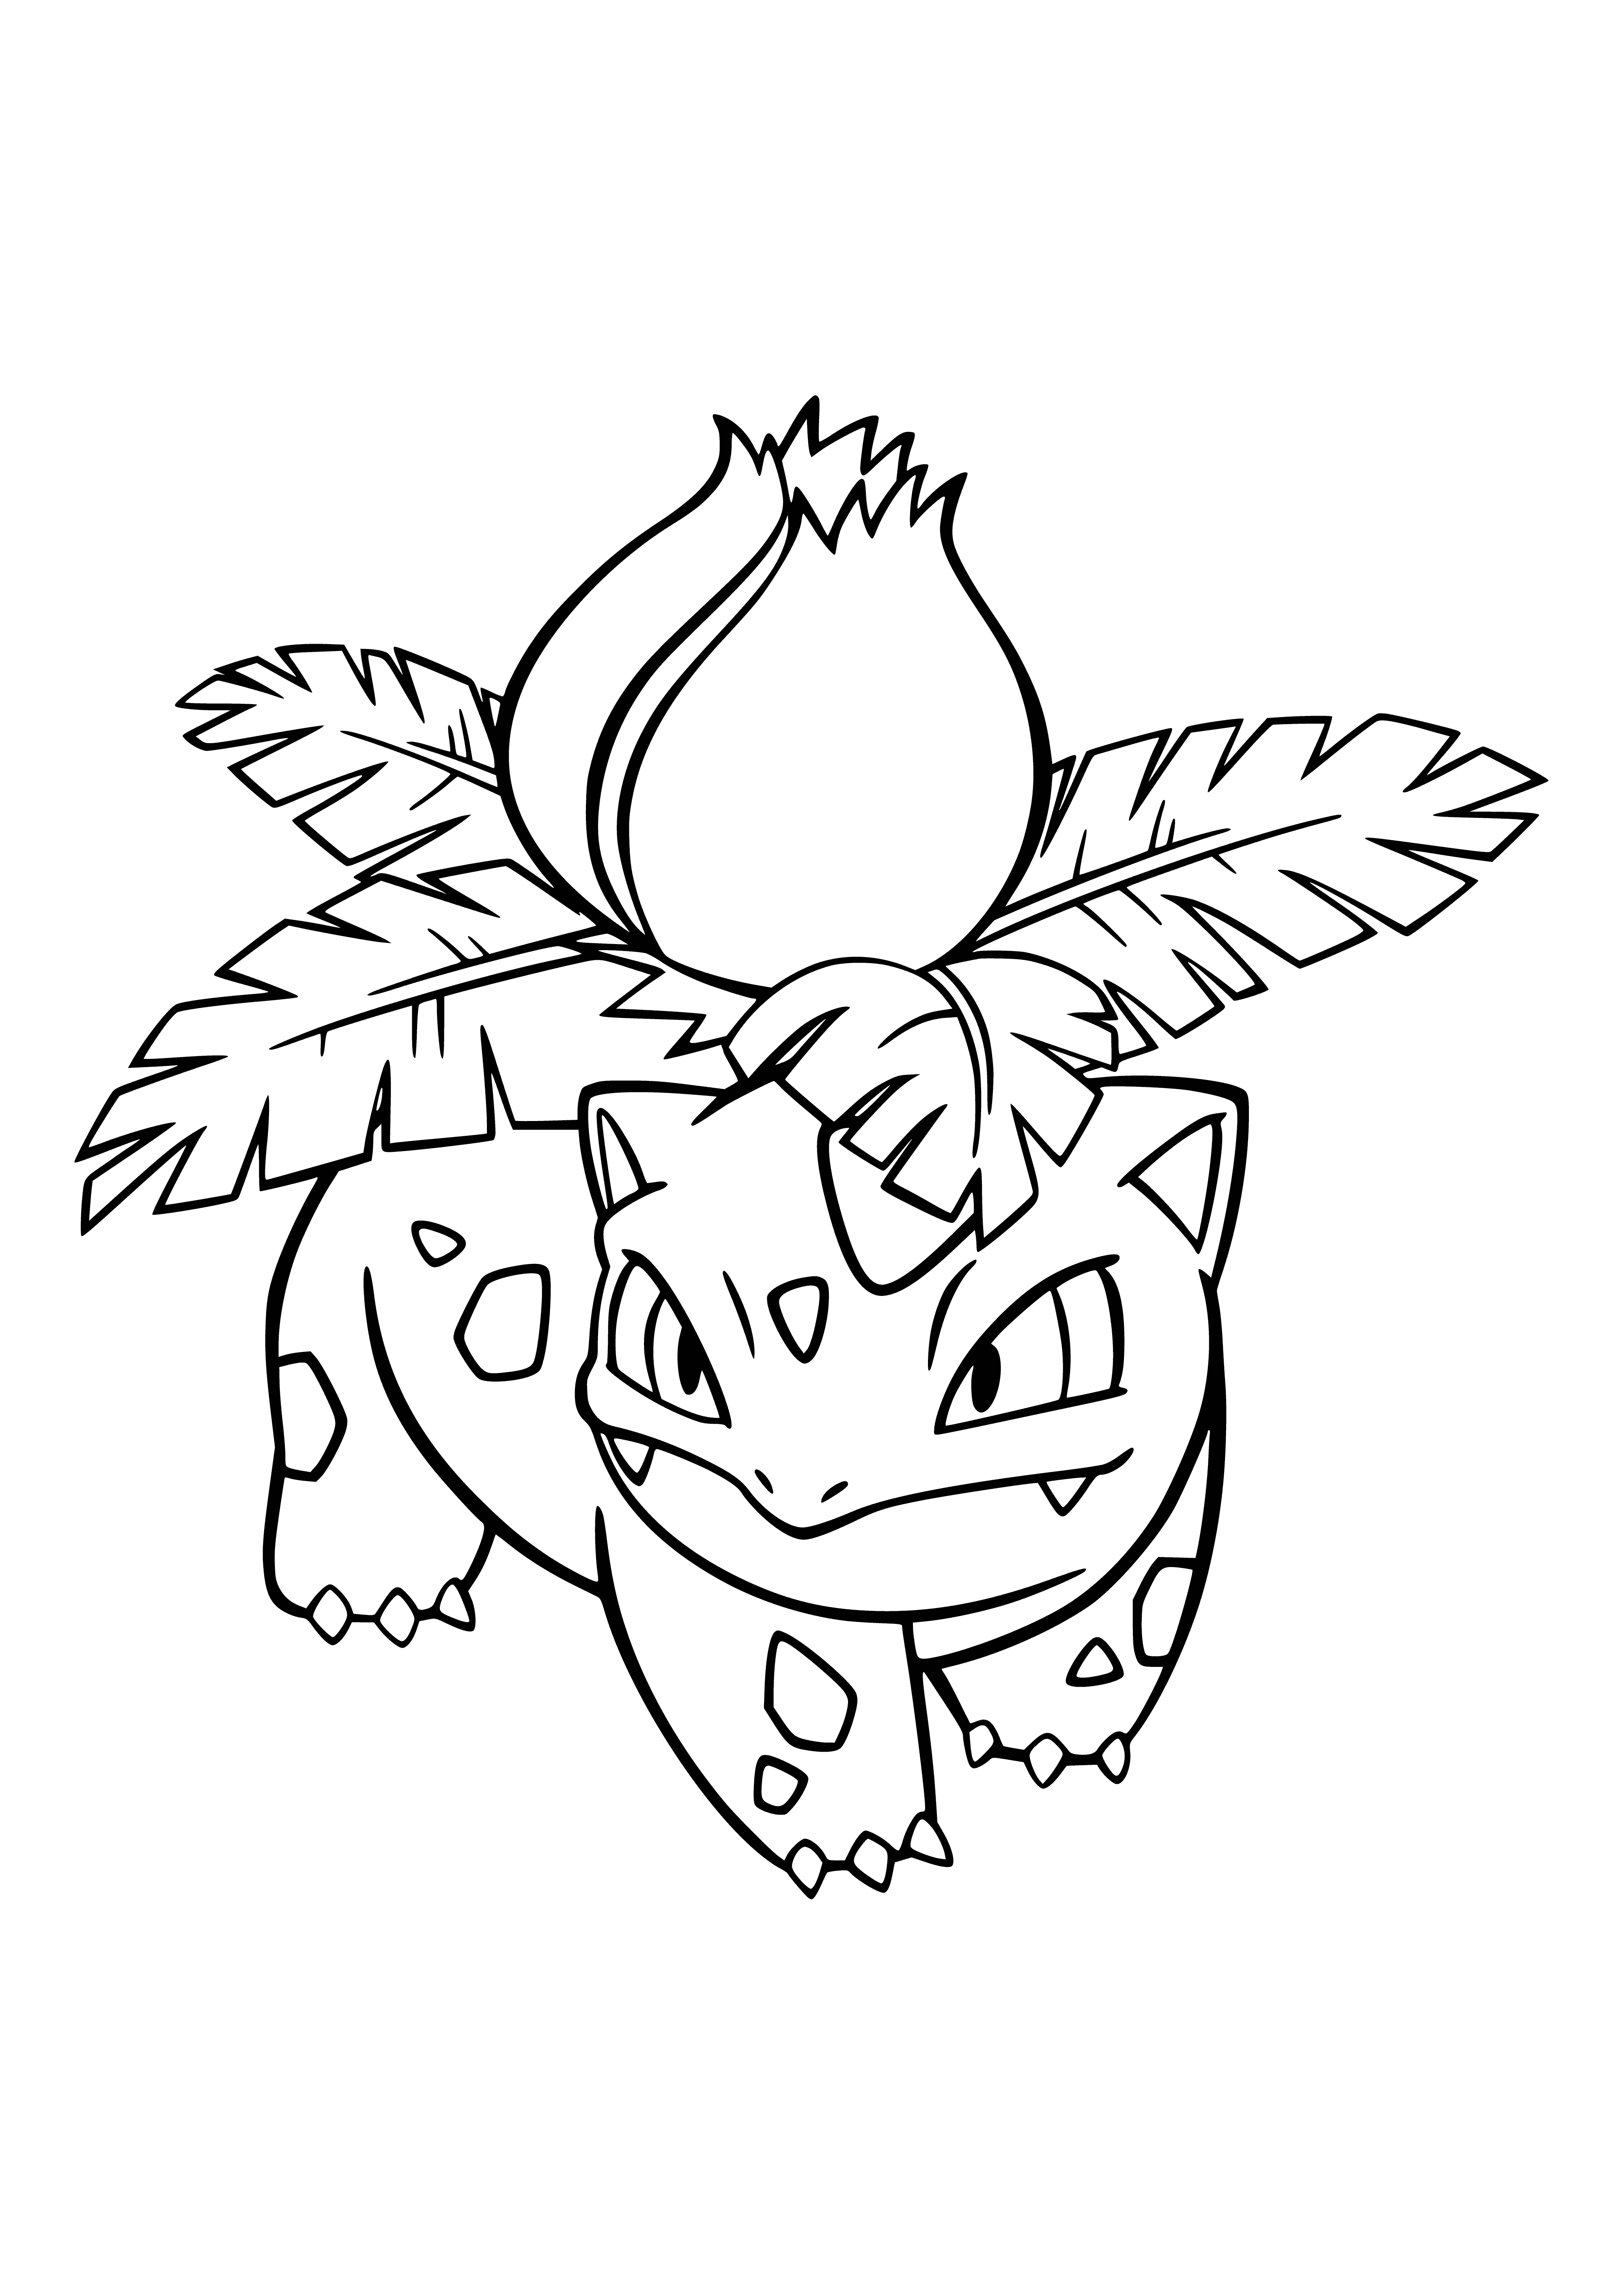 coloring page: Pokemon Ivysaur is a quadrupedal creature with blue body and yellow underbelly; has bulbous growth on back, sharp teeth, and red eyes. #Pokemon